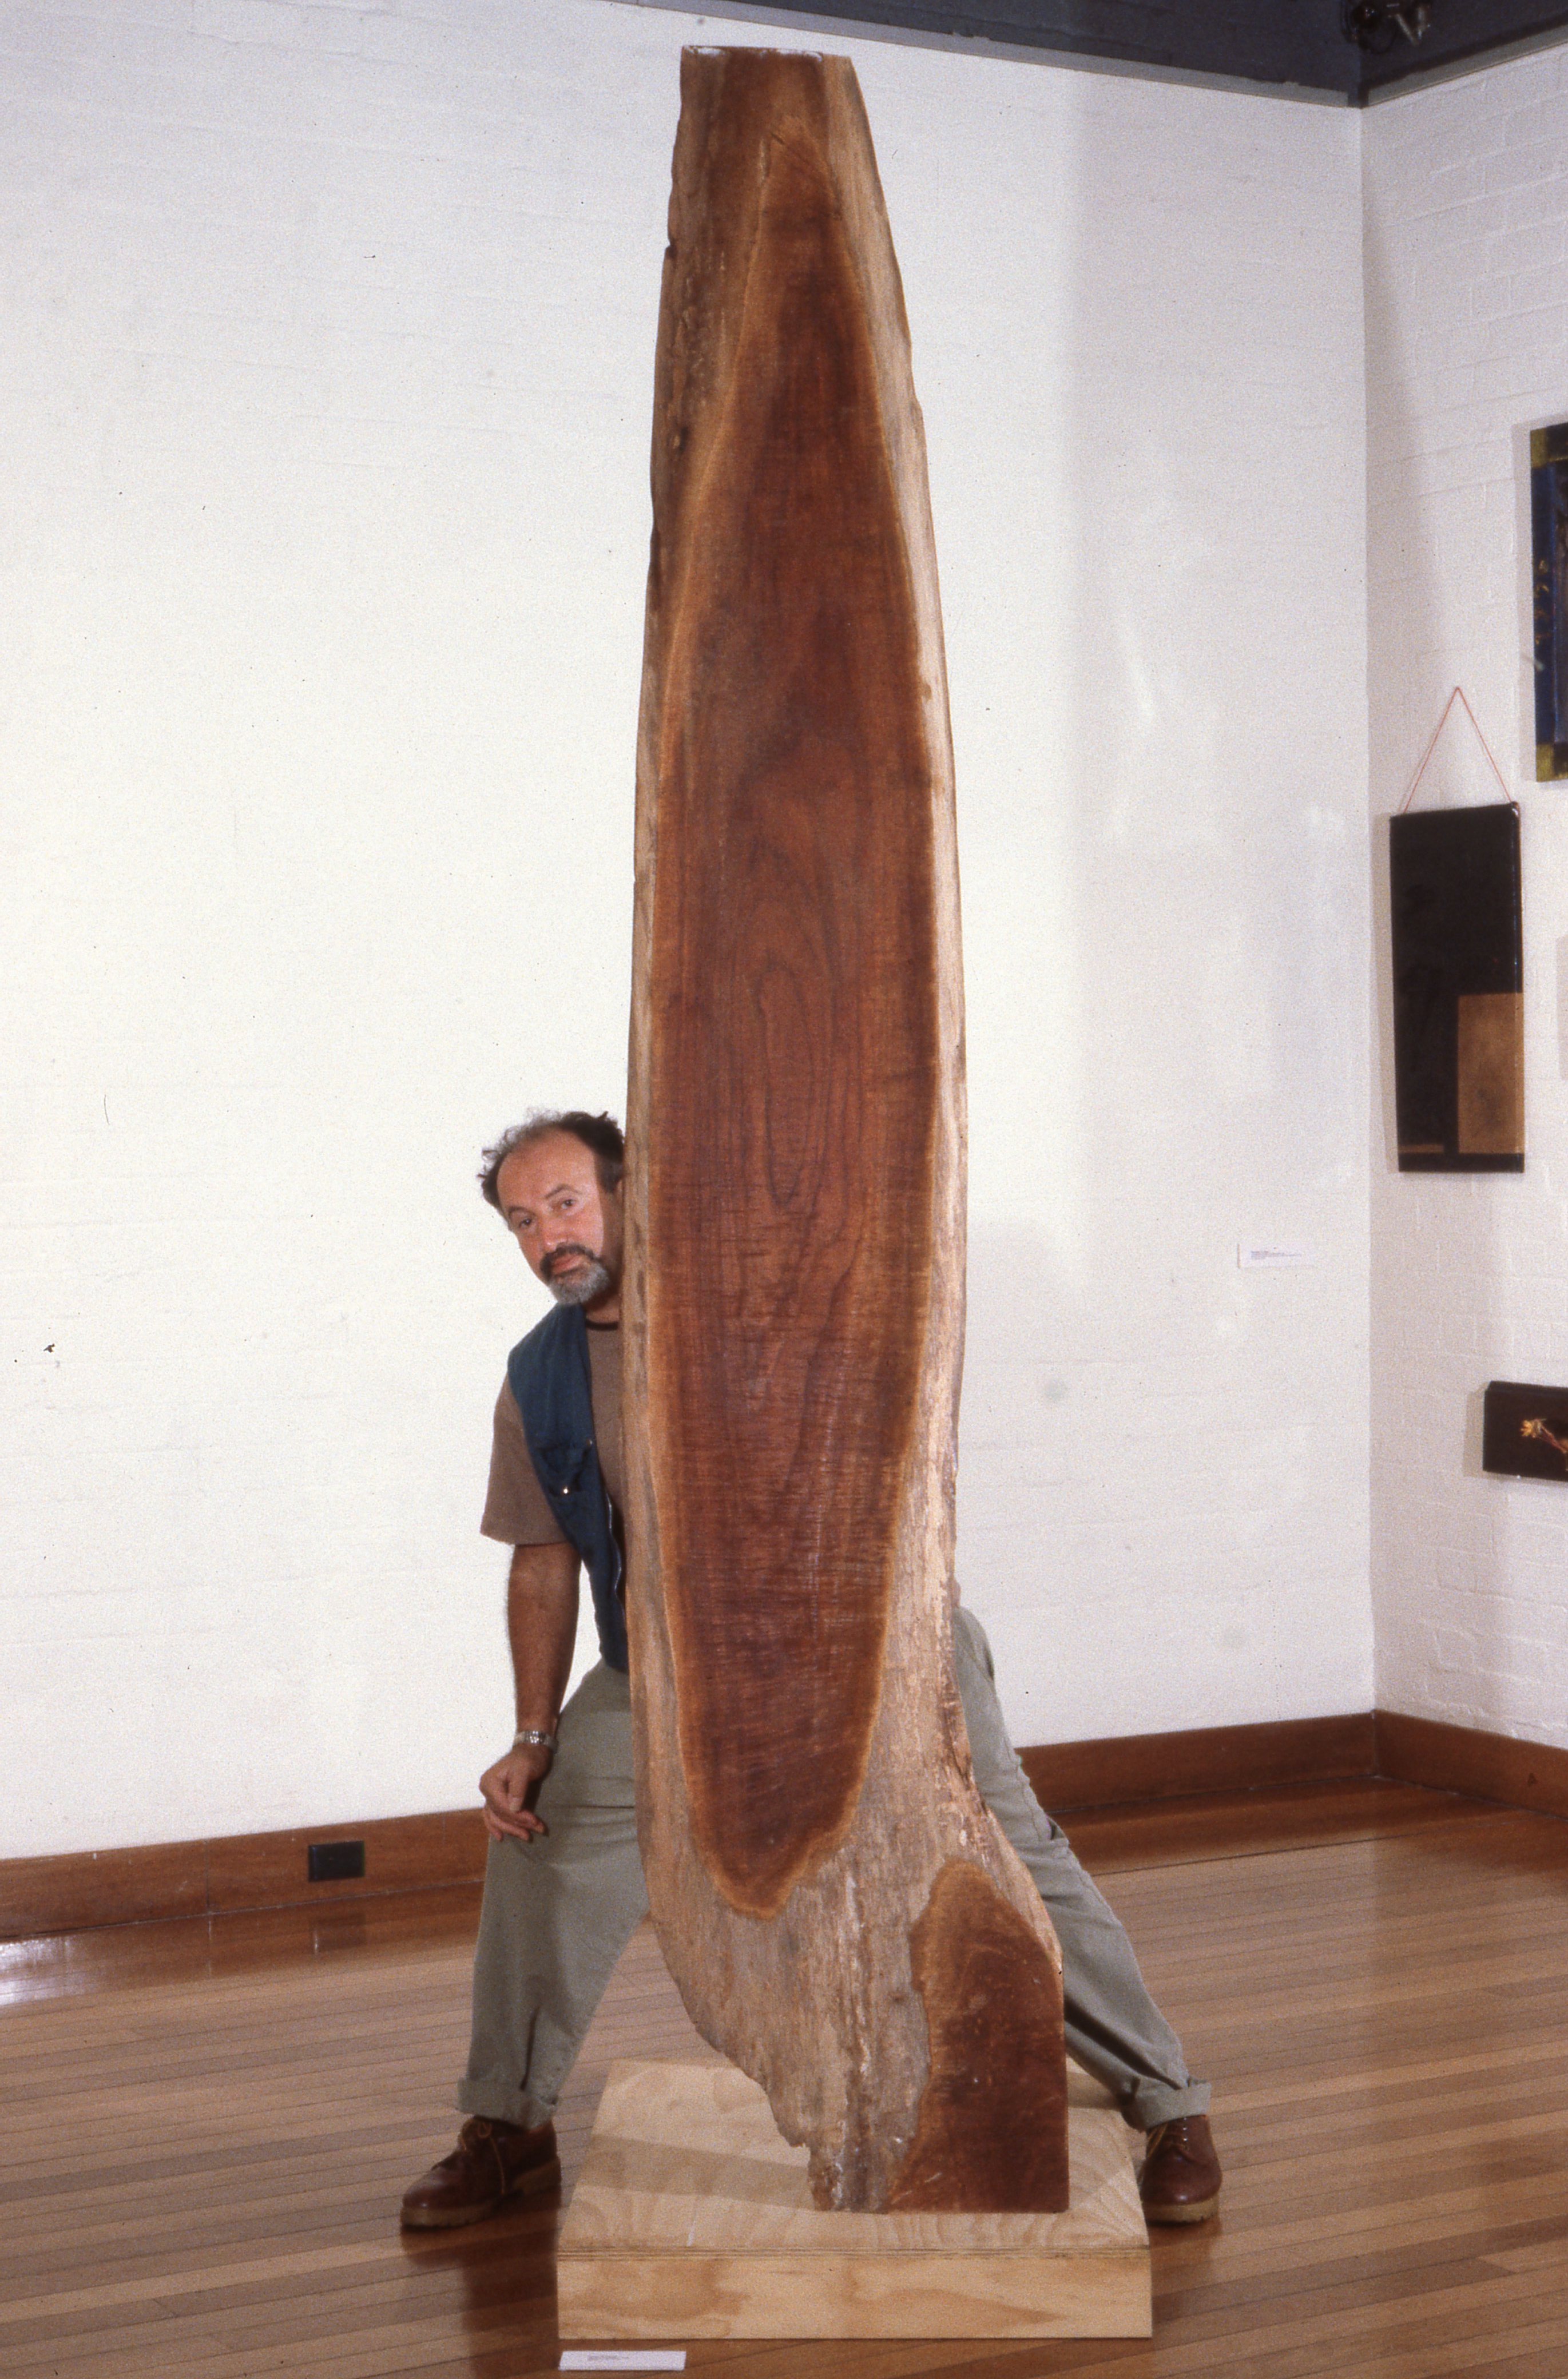 idg_archive_1992_the_phallus_and_its_functions_002_install.jpg